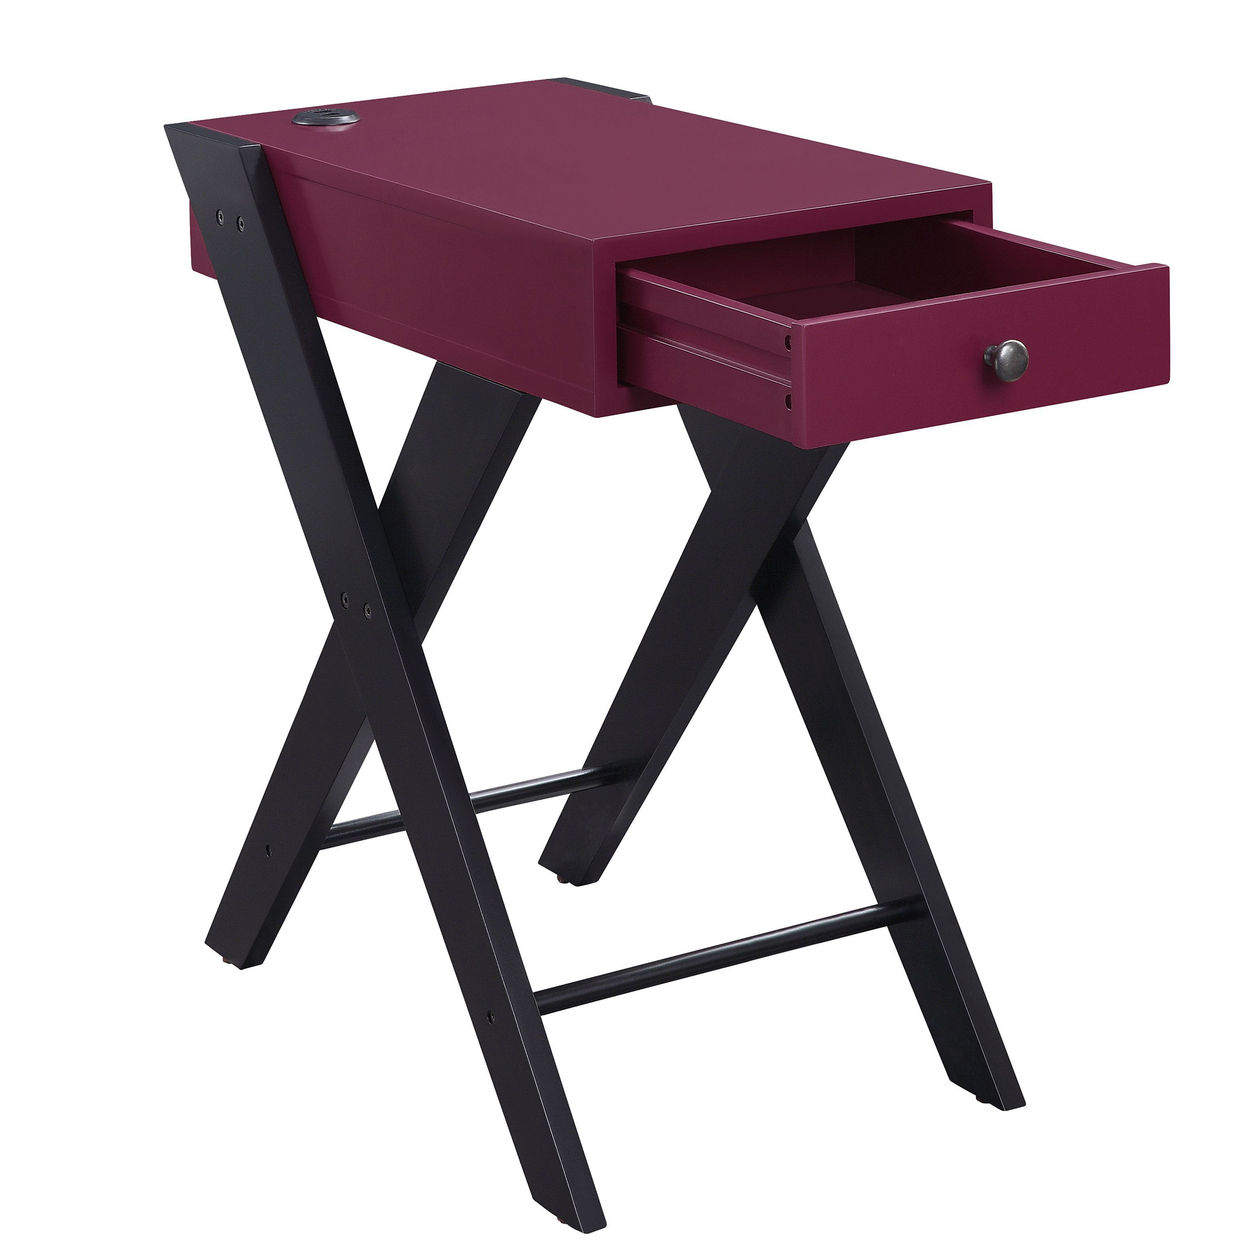 Wooden Frame Side Table With X Shaped Legs And 1 Drawer, Purple And Black- Saltoro Sherpi